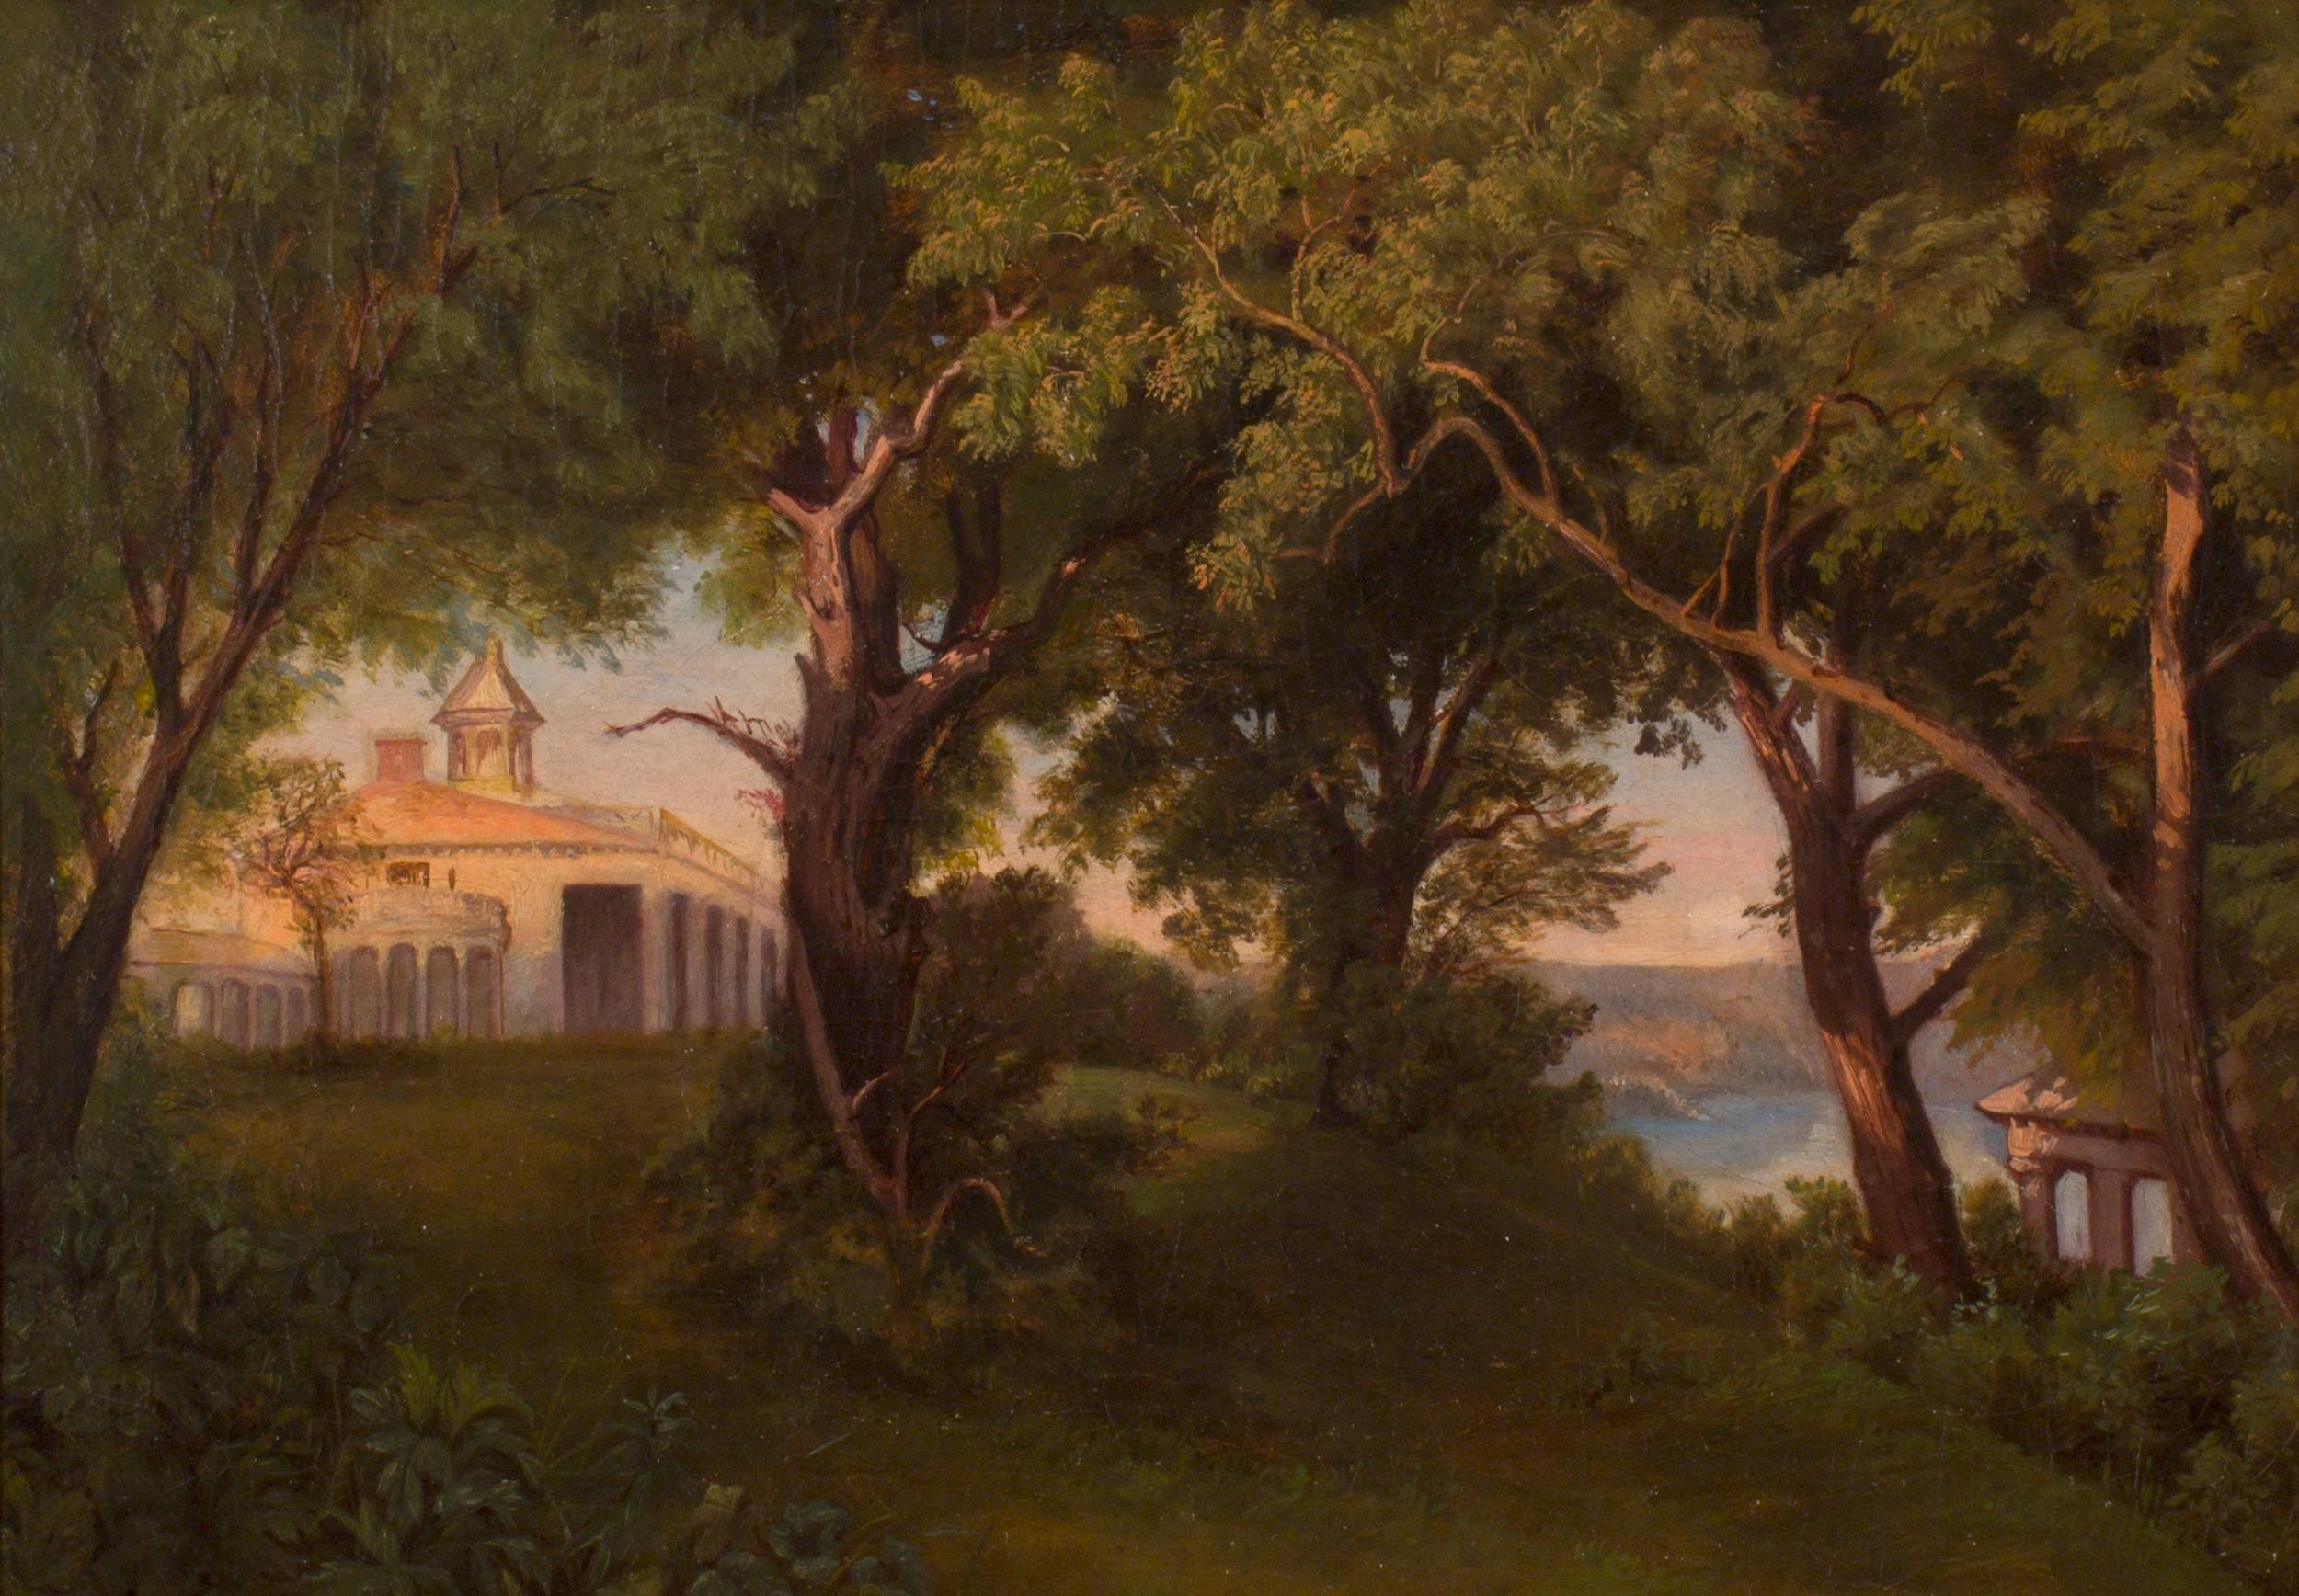 View of Mount Vernon Estate, the historic home of George and Martha Washington - Painting by Unknown